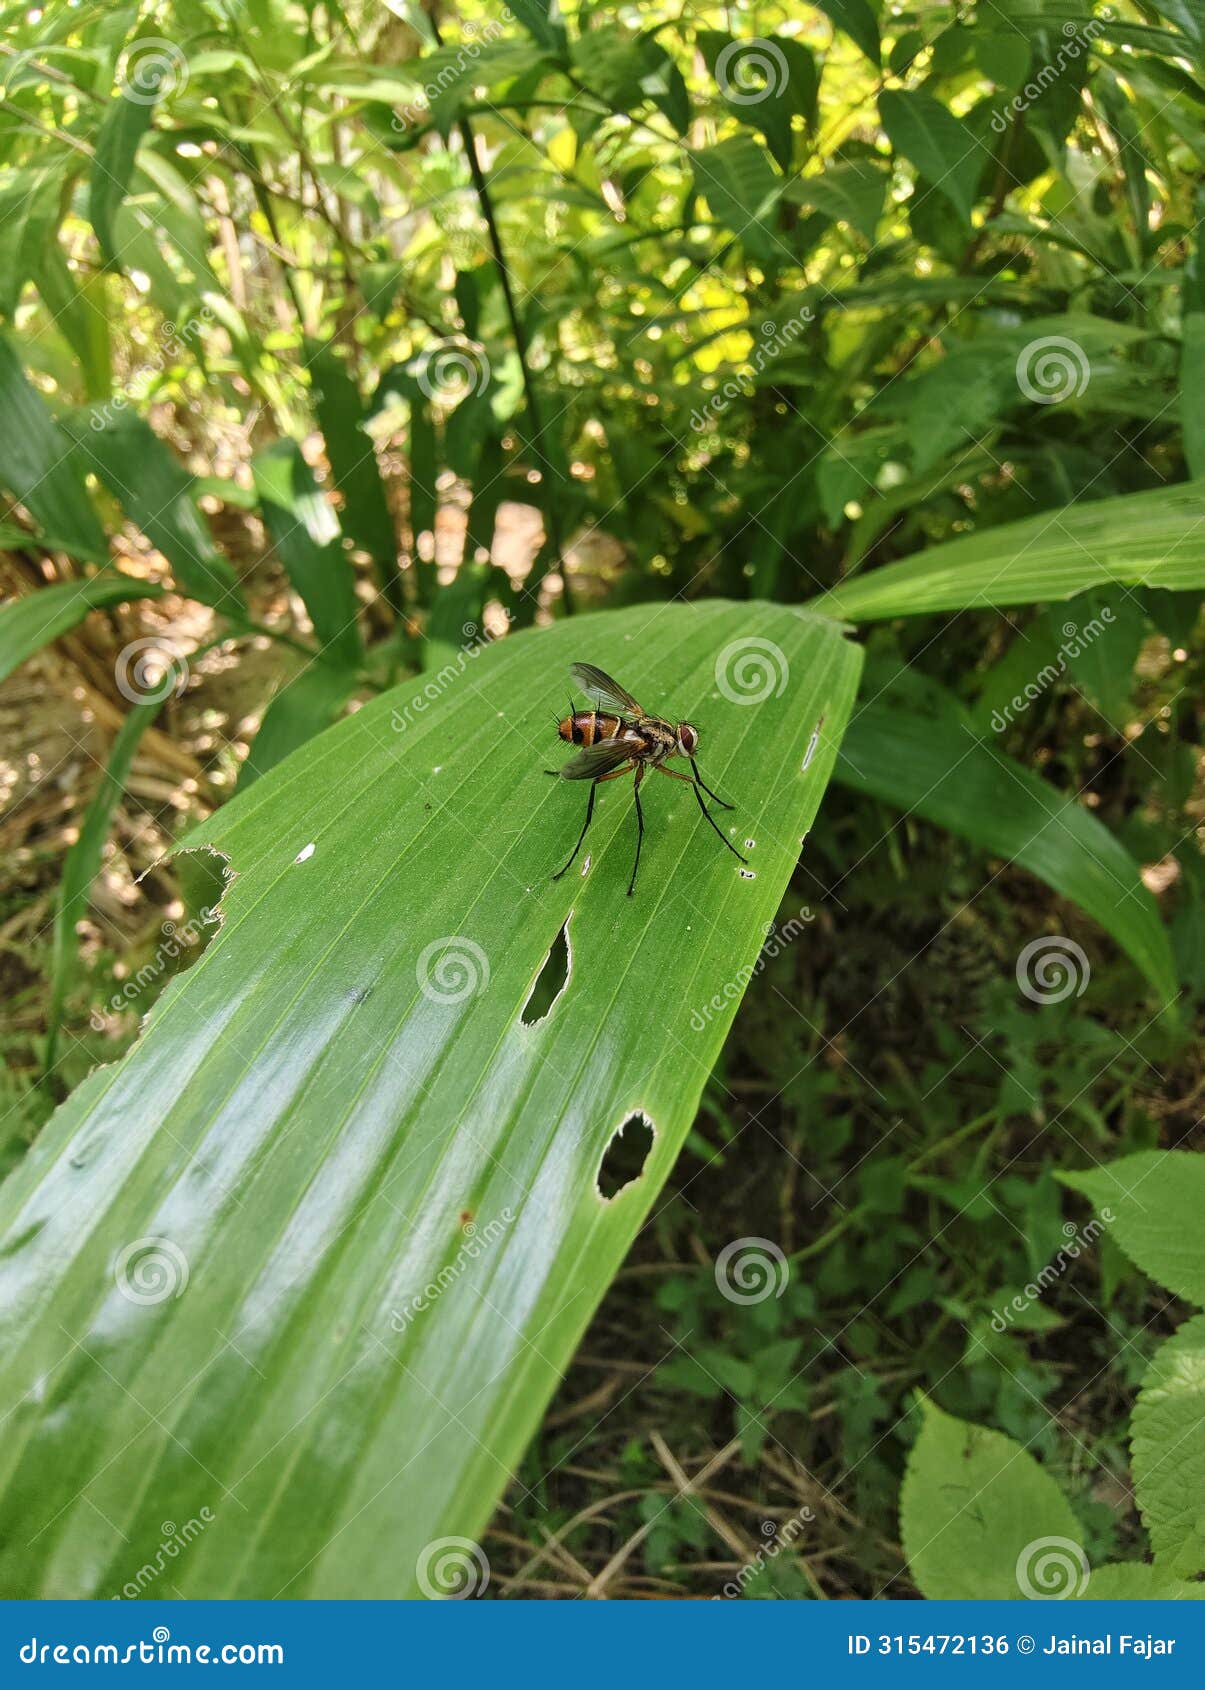 a fairly large fly was seen sitting on a leaf